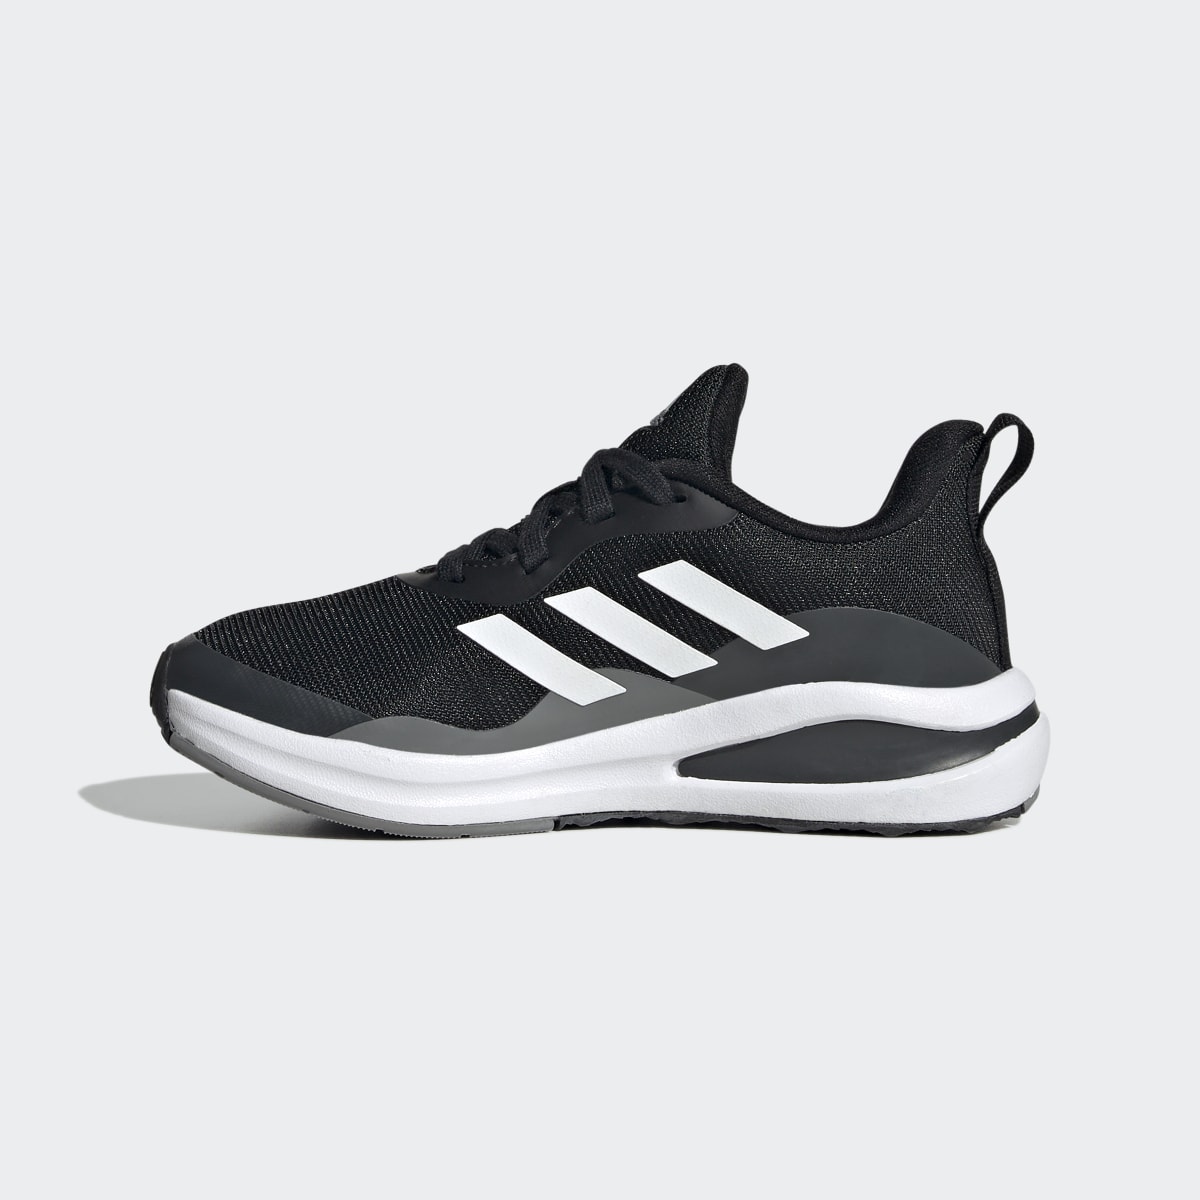 Adidas FortaRun Sport Running Lace Shoes. 7